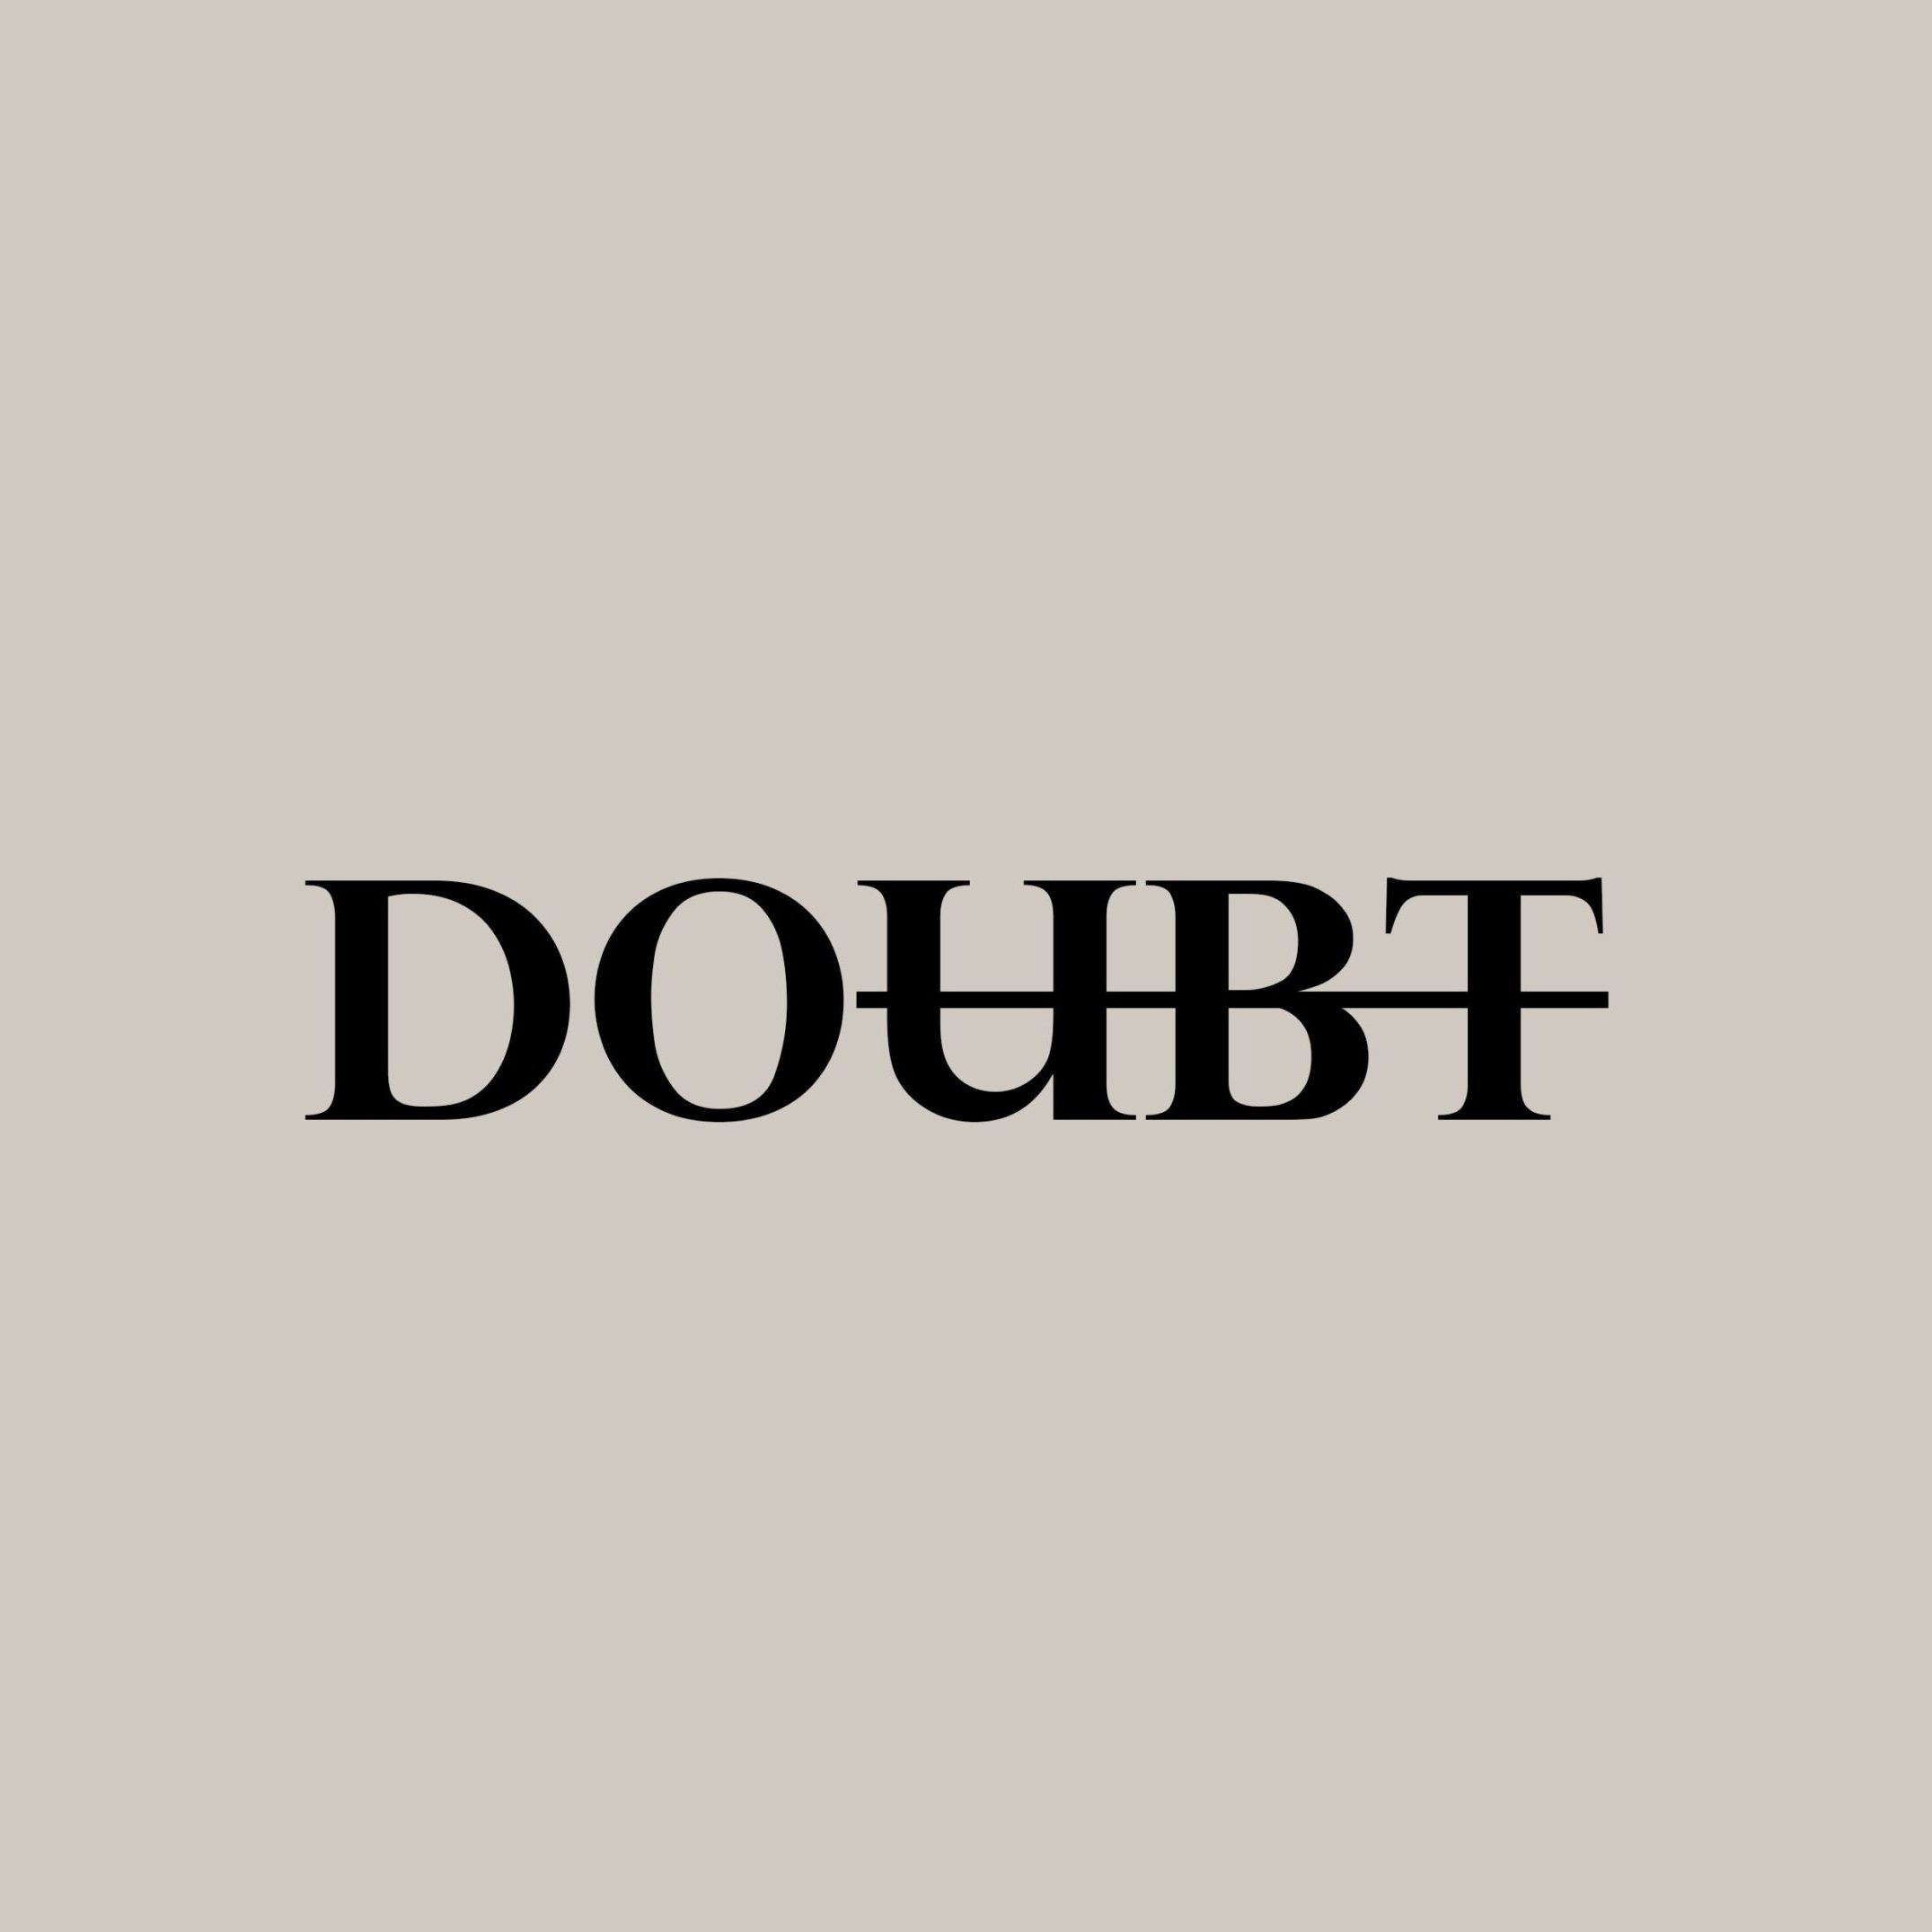 The word doubt with the 'ubt' crossed out so it now reads 'do'.